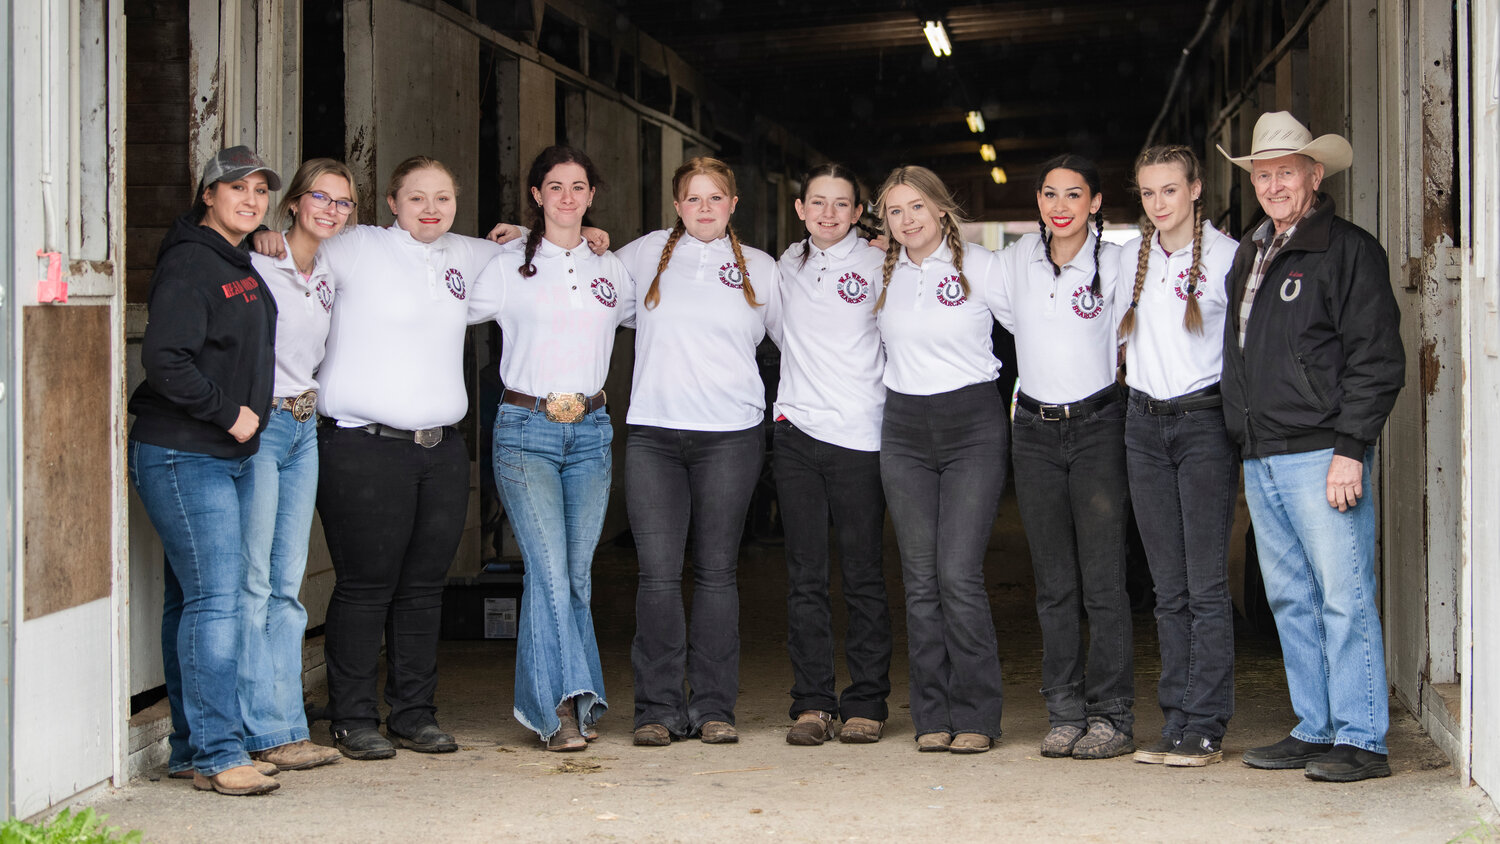 Seniors on the W.F. West equestrian team pose with their coaches for a photo during the final district meet of the season in Tacoma last April. From left, Coach Lea Elder, Savanna Dorning, Liberty Smith, Josey Majors, Reagan Olson, Madison Smith, Allie Sutich, Jeznee Journee, Raylee Andseron and Head Coach Adam Kasper.